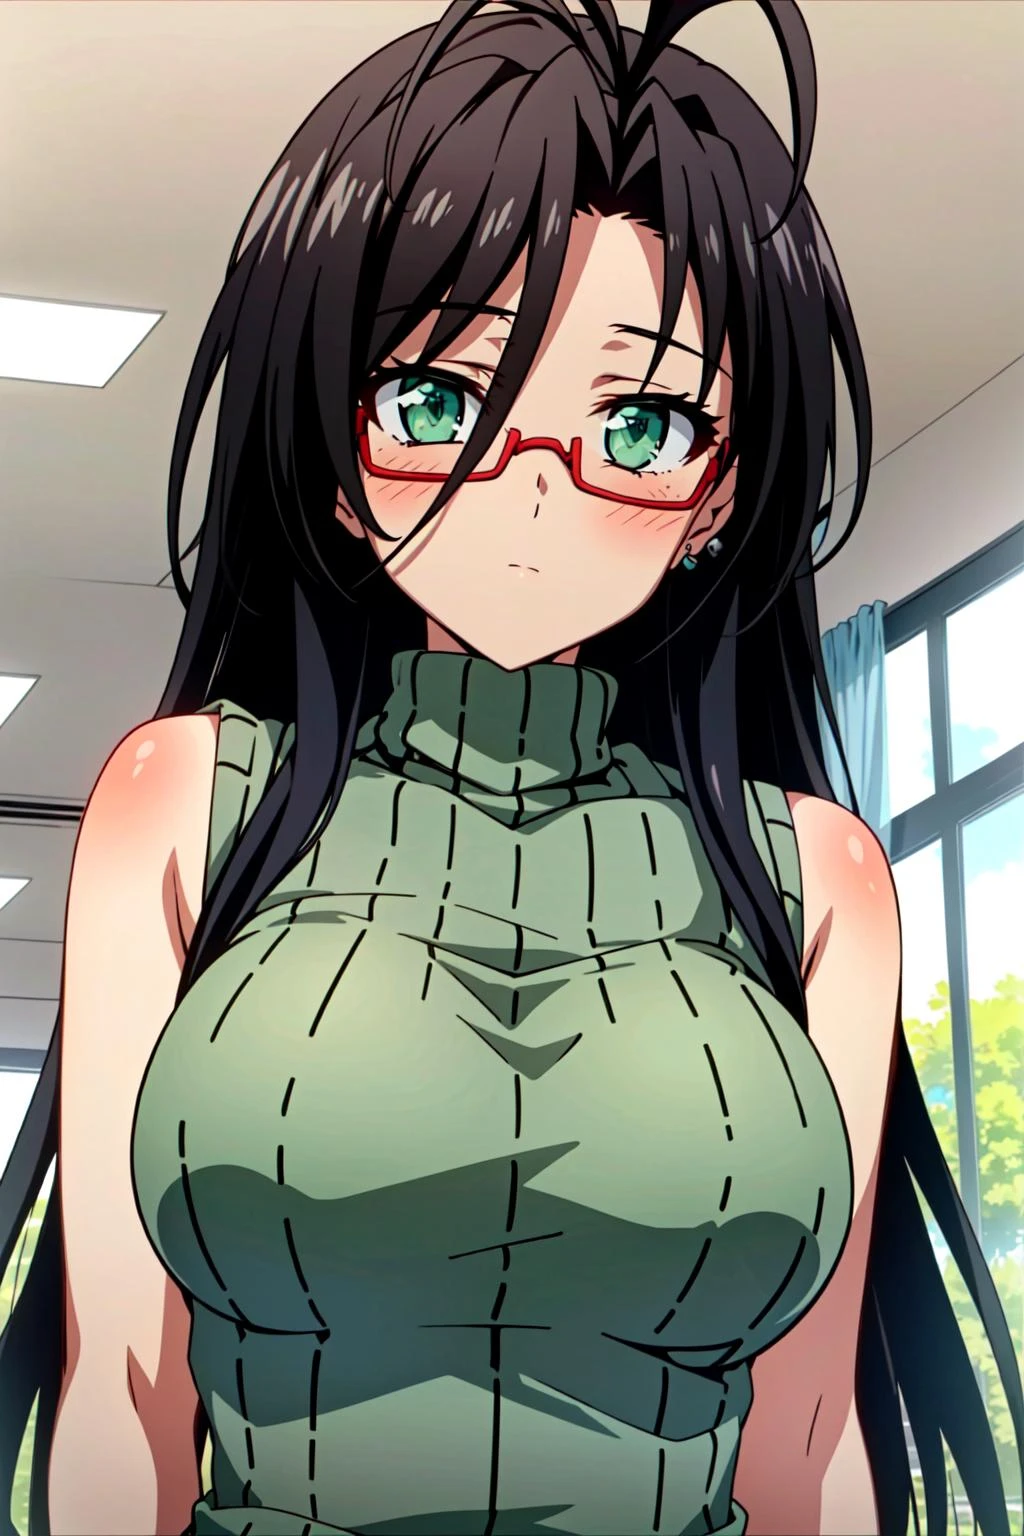 A close up of a person with glasses and a green top - SeaArt AI